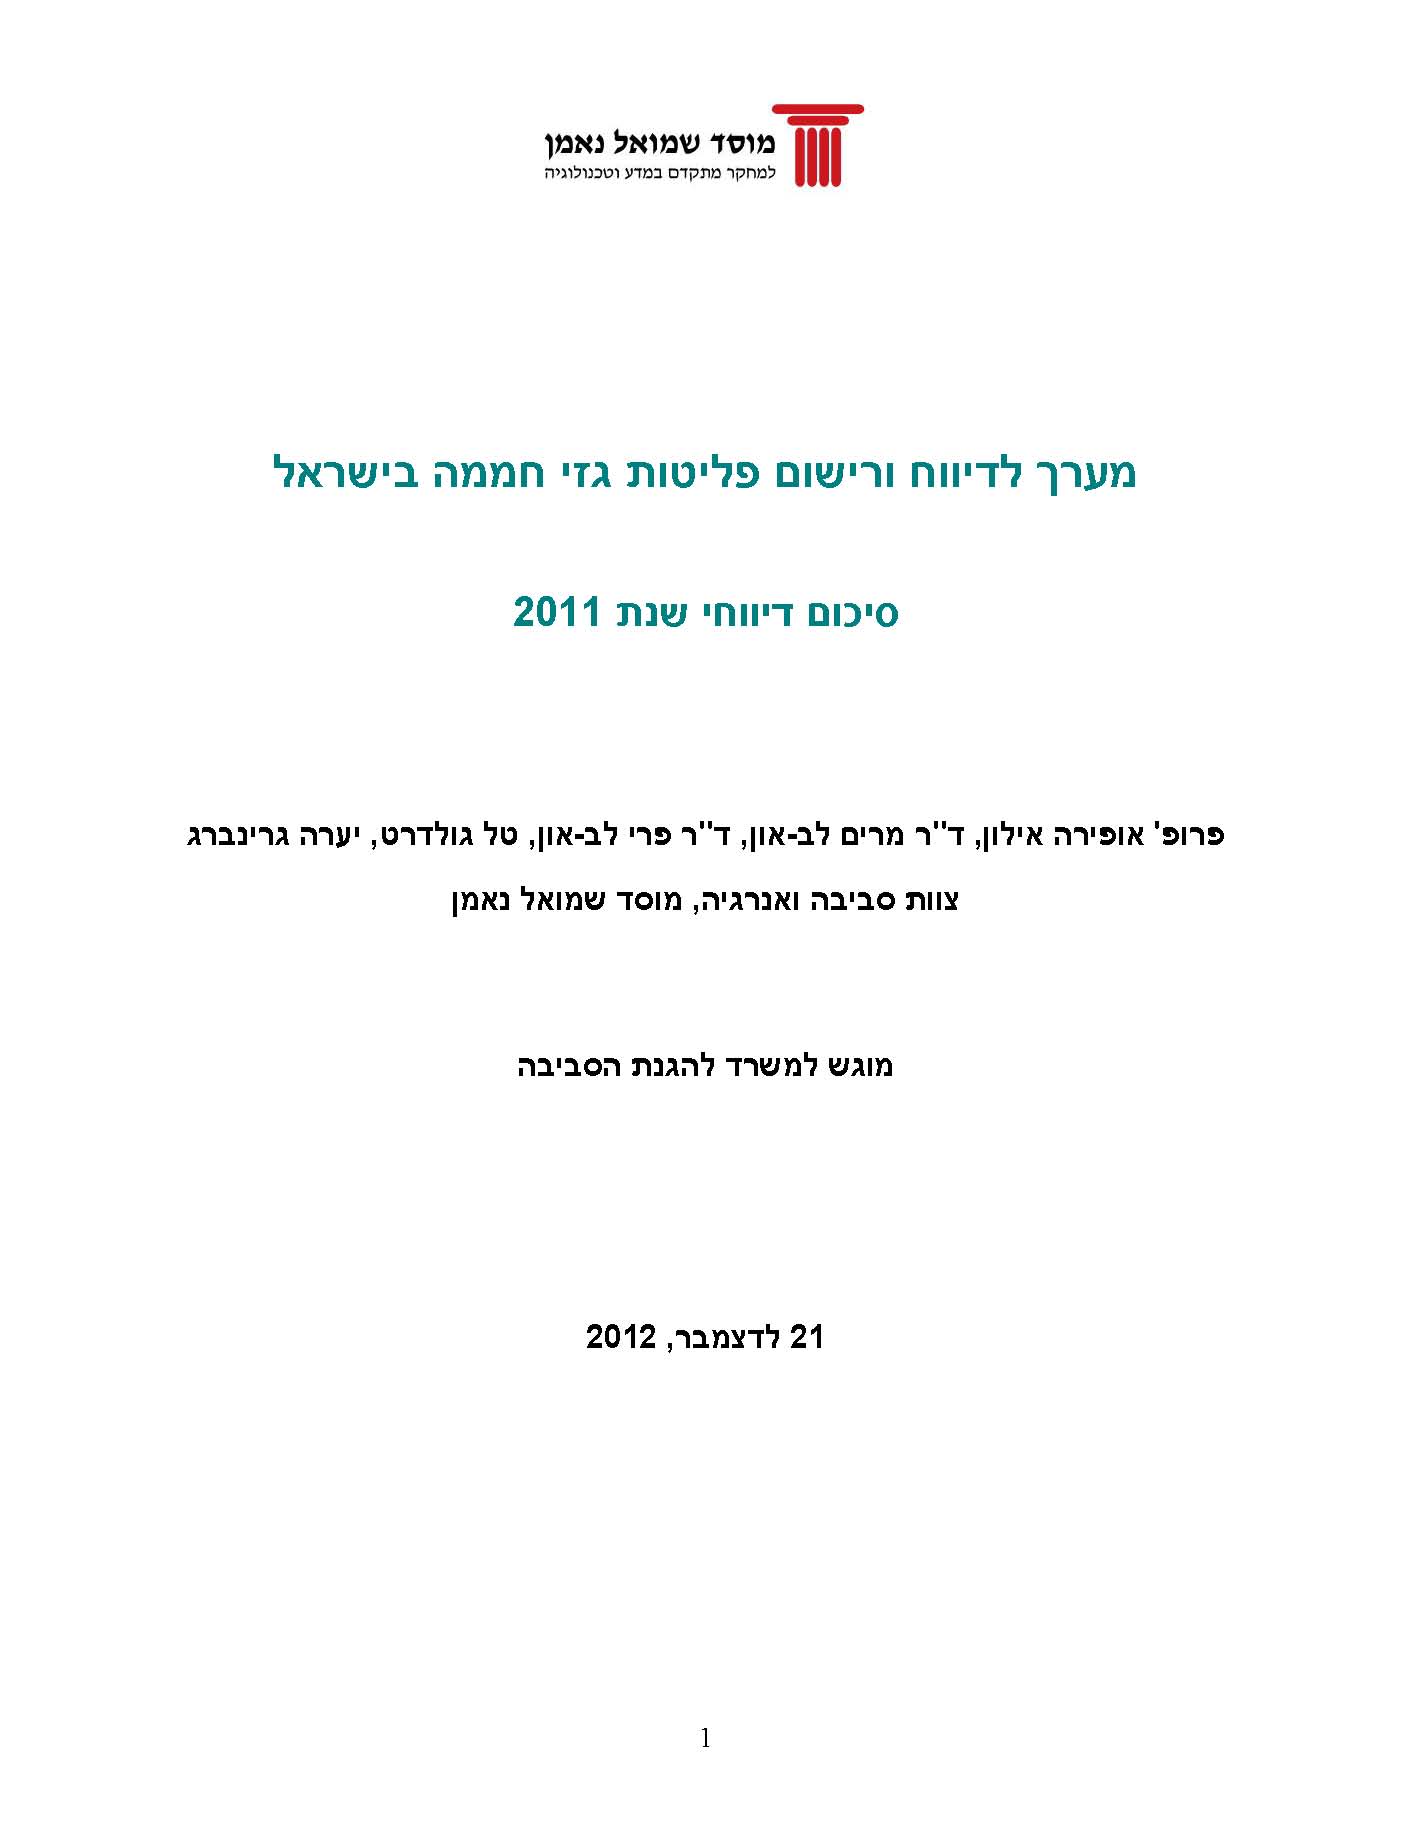 Greenhouse Gas Emissions Reporting and Registration System in Israel: Summary of Reports for 2011